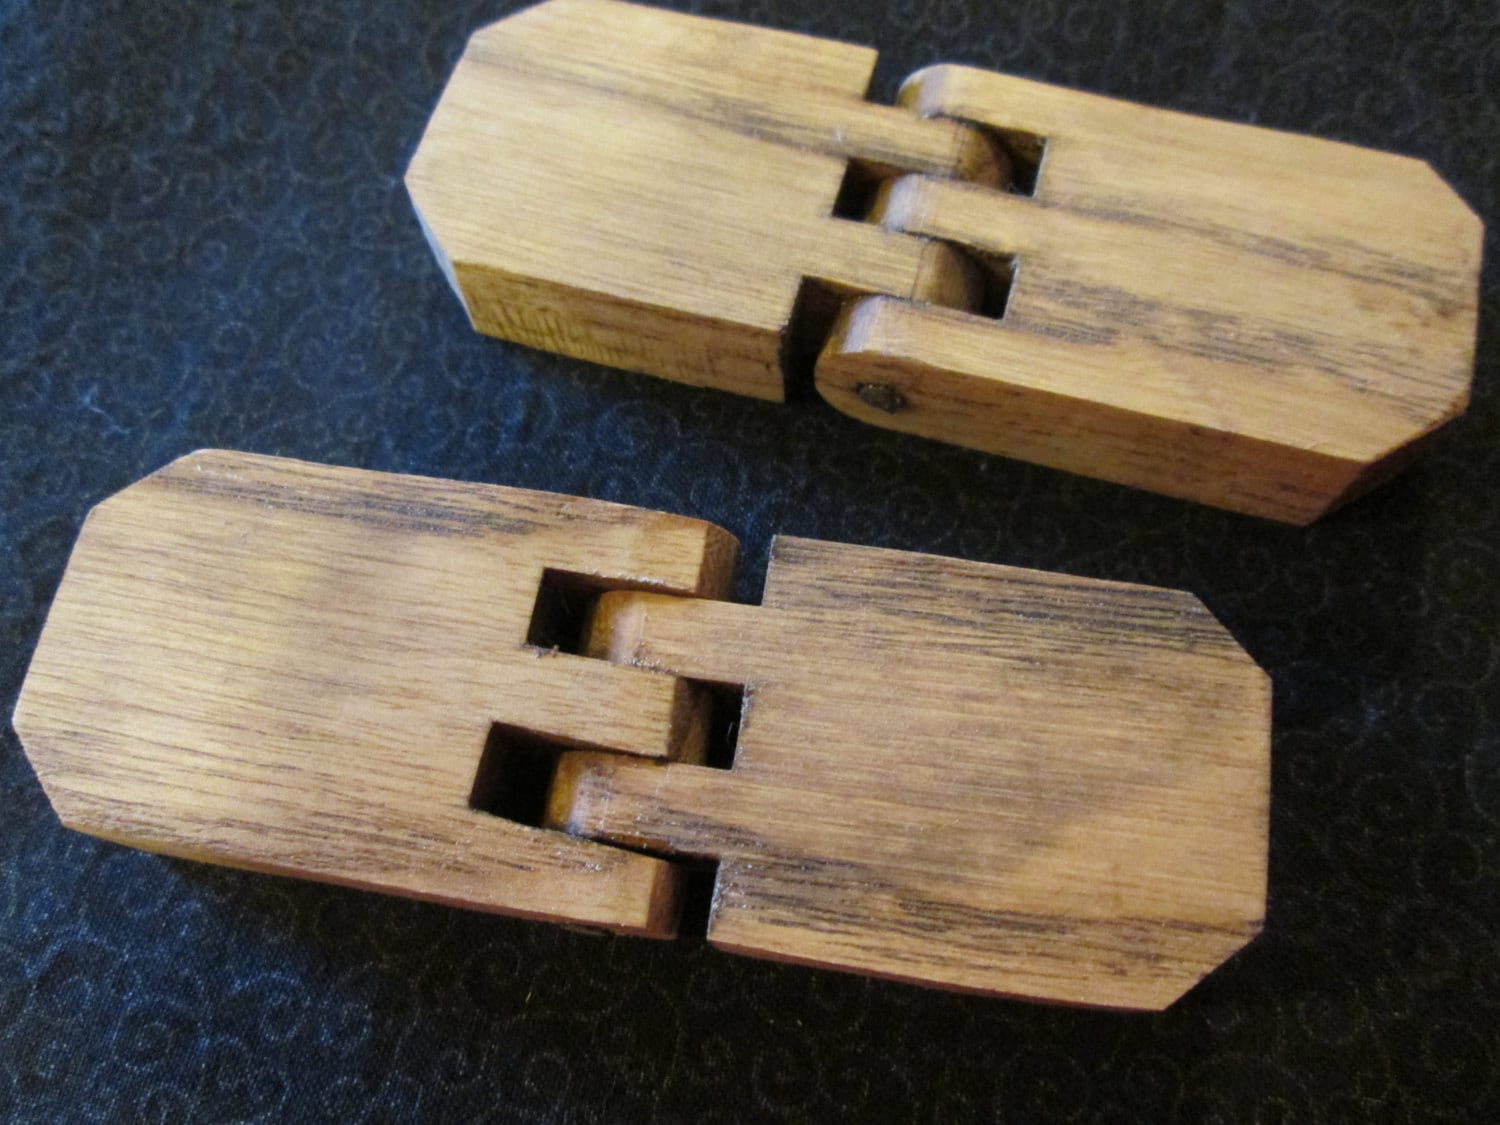 sHIPS fREE Set of 2 Handcrafted Wooden Hinges Ash with